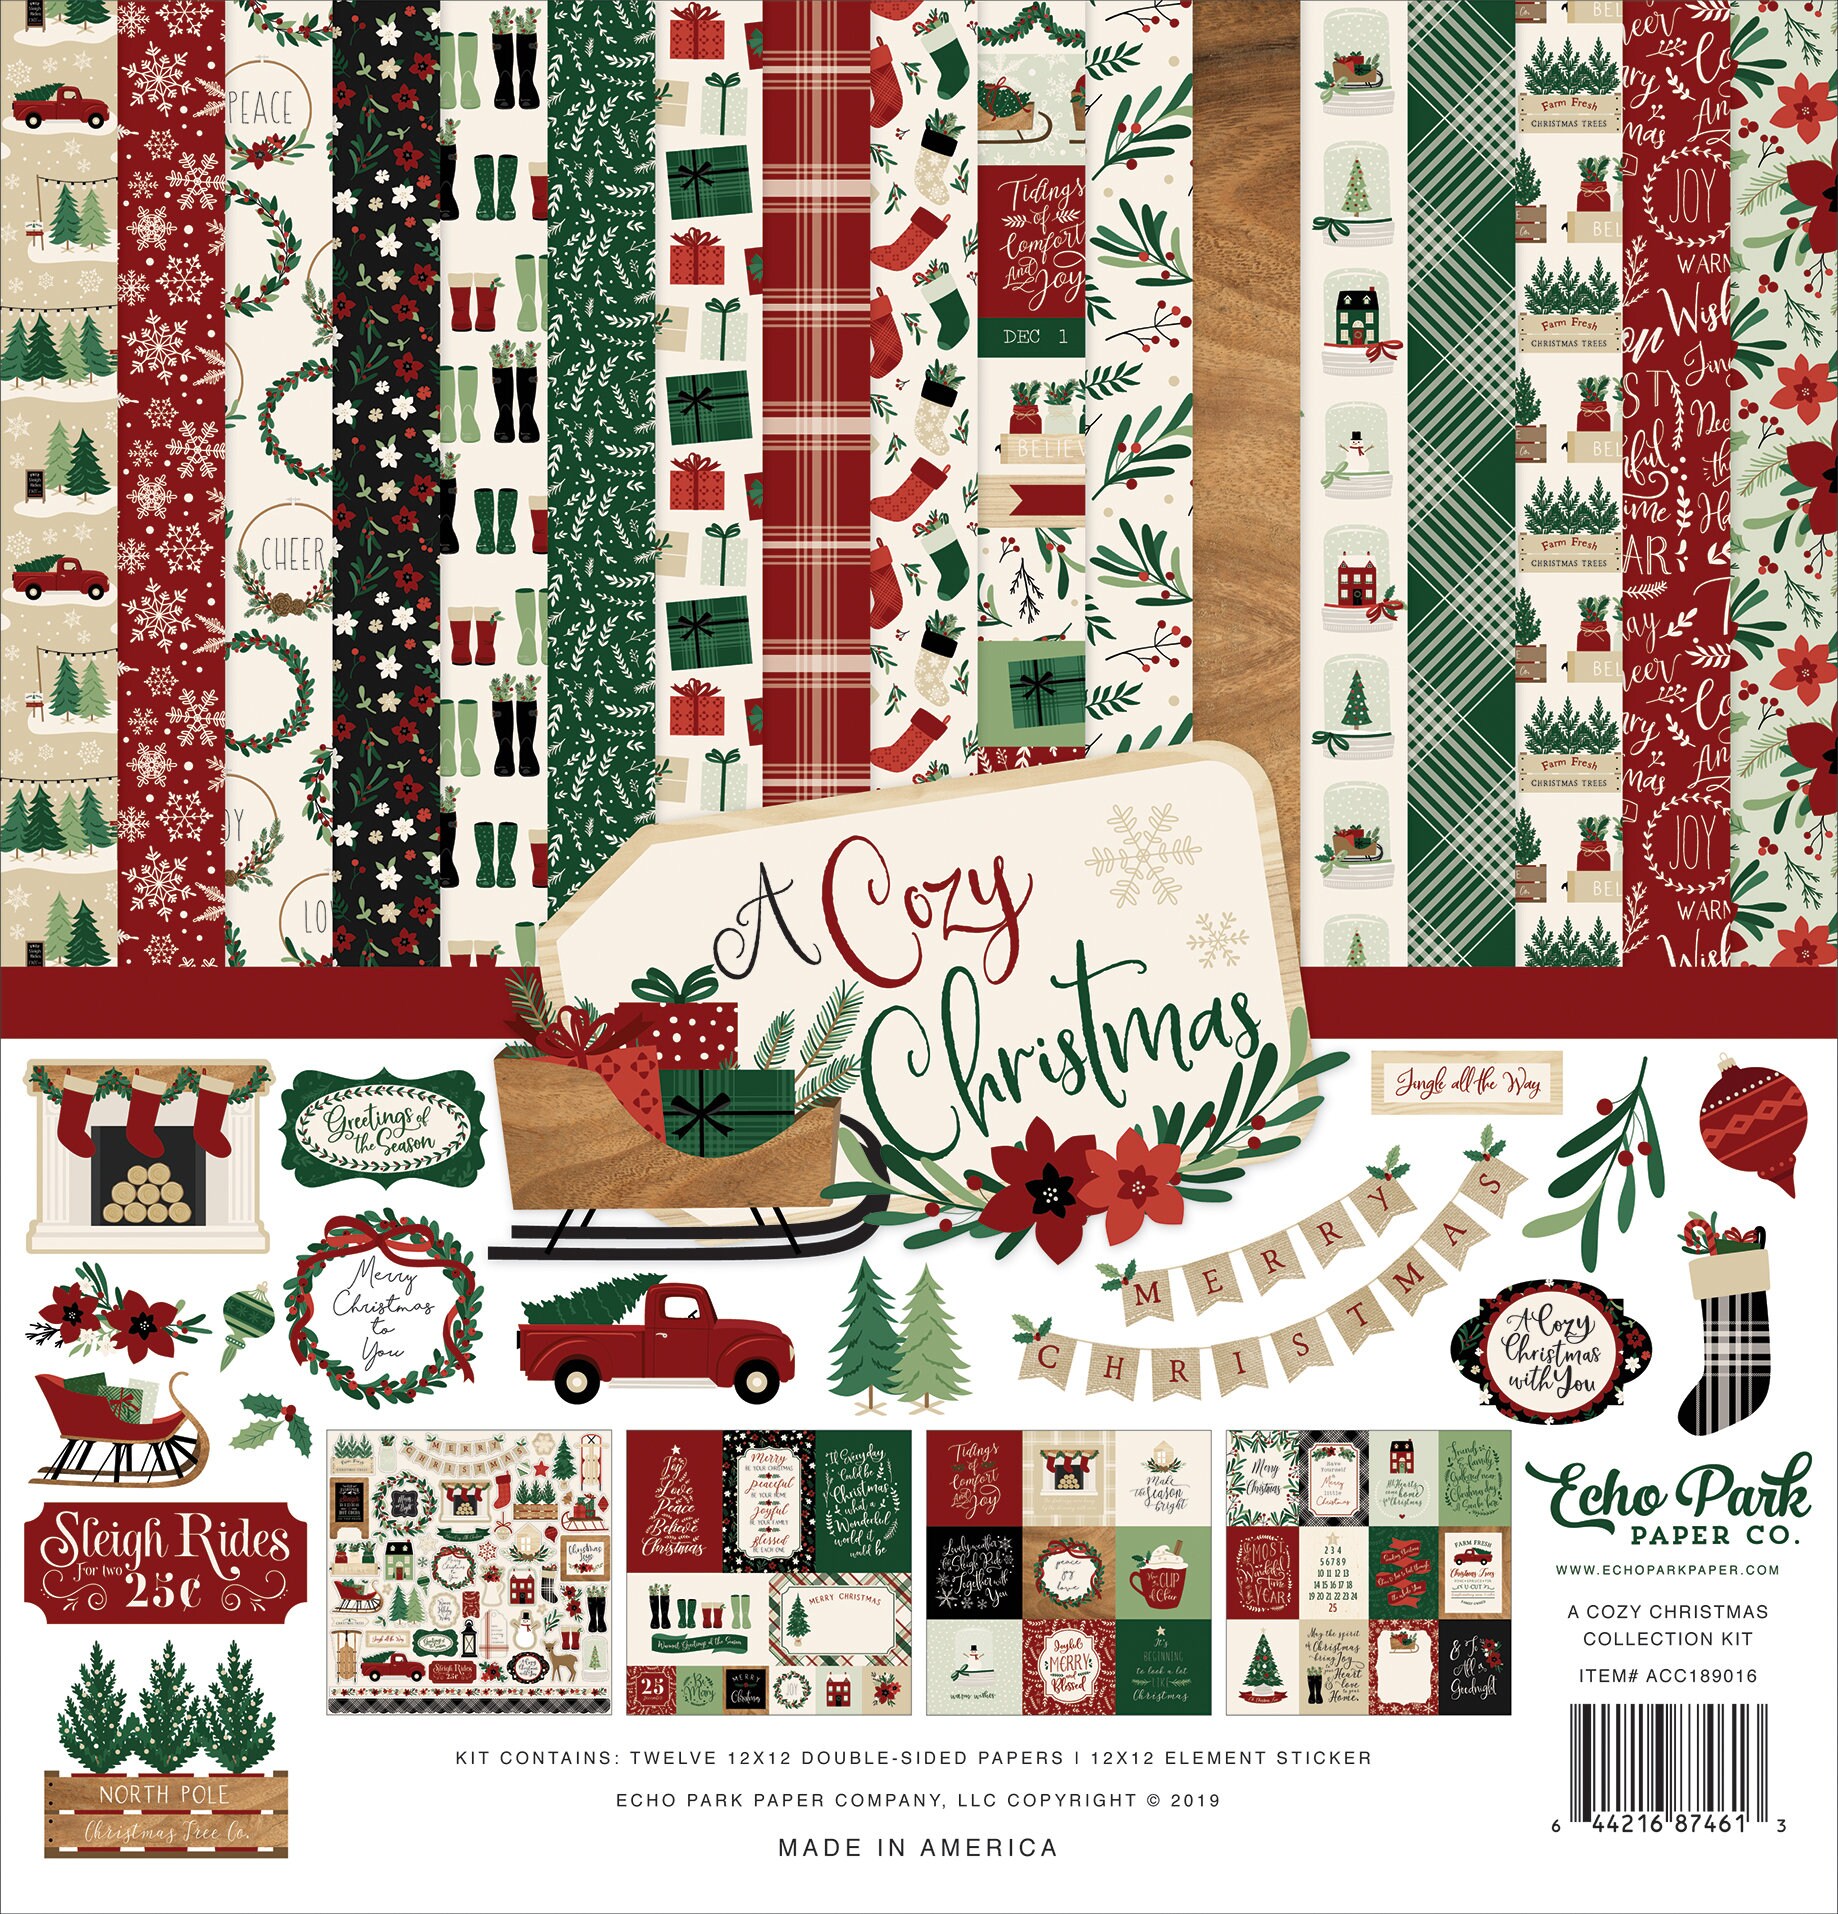 Echo Park Paper Co. 'twas the Night Before Christmas Volume 1 Element  Stickers, 12X12 Sticker Sheet, Christmas Stickers, Christmas Scrap 